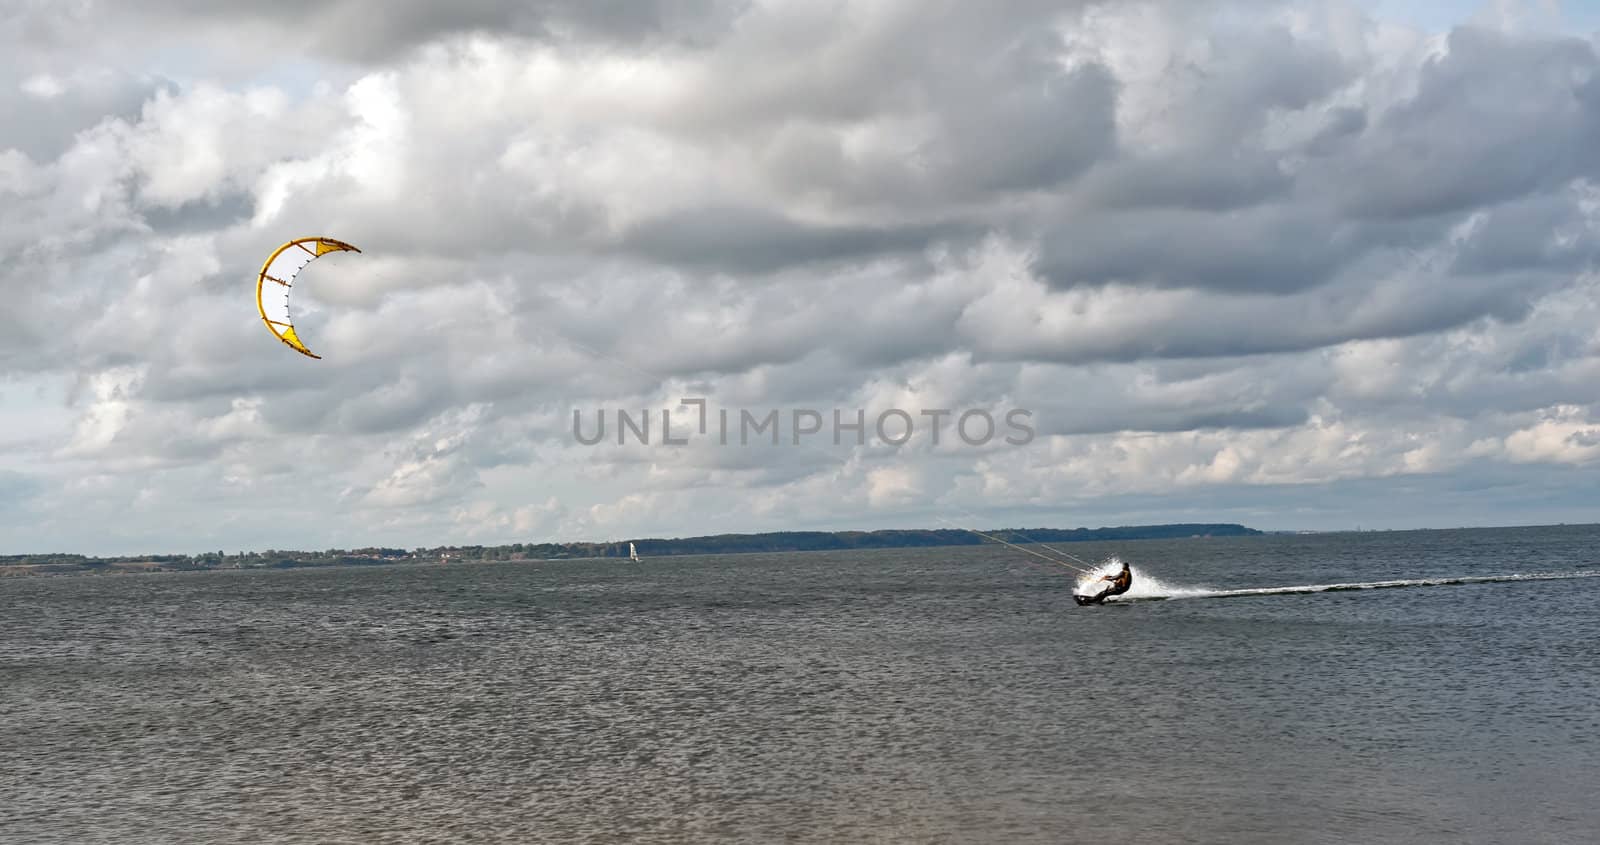 Kite surfing on a cloudy day in Baltic sea